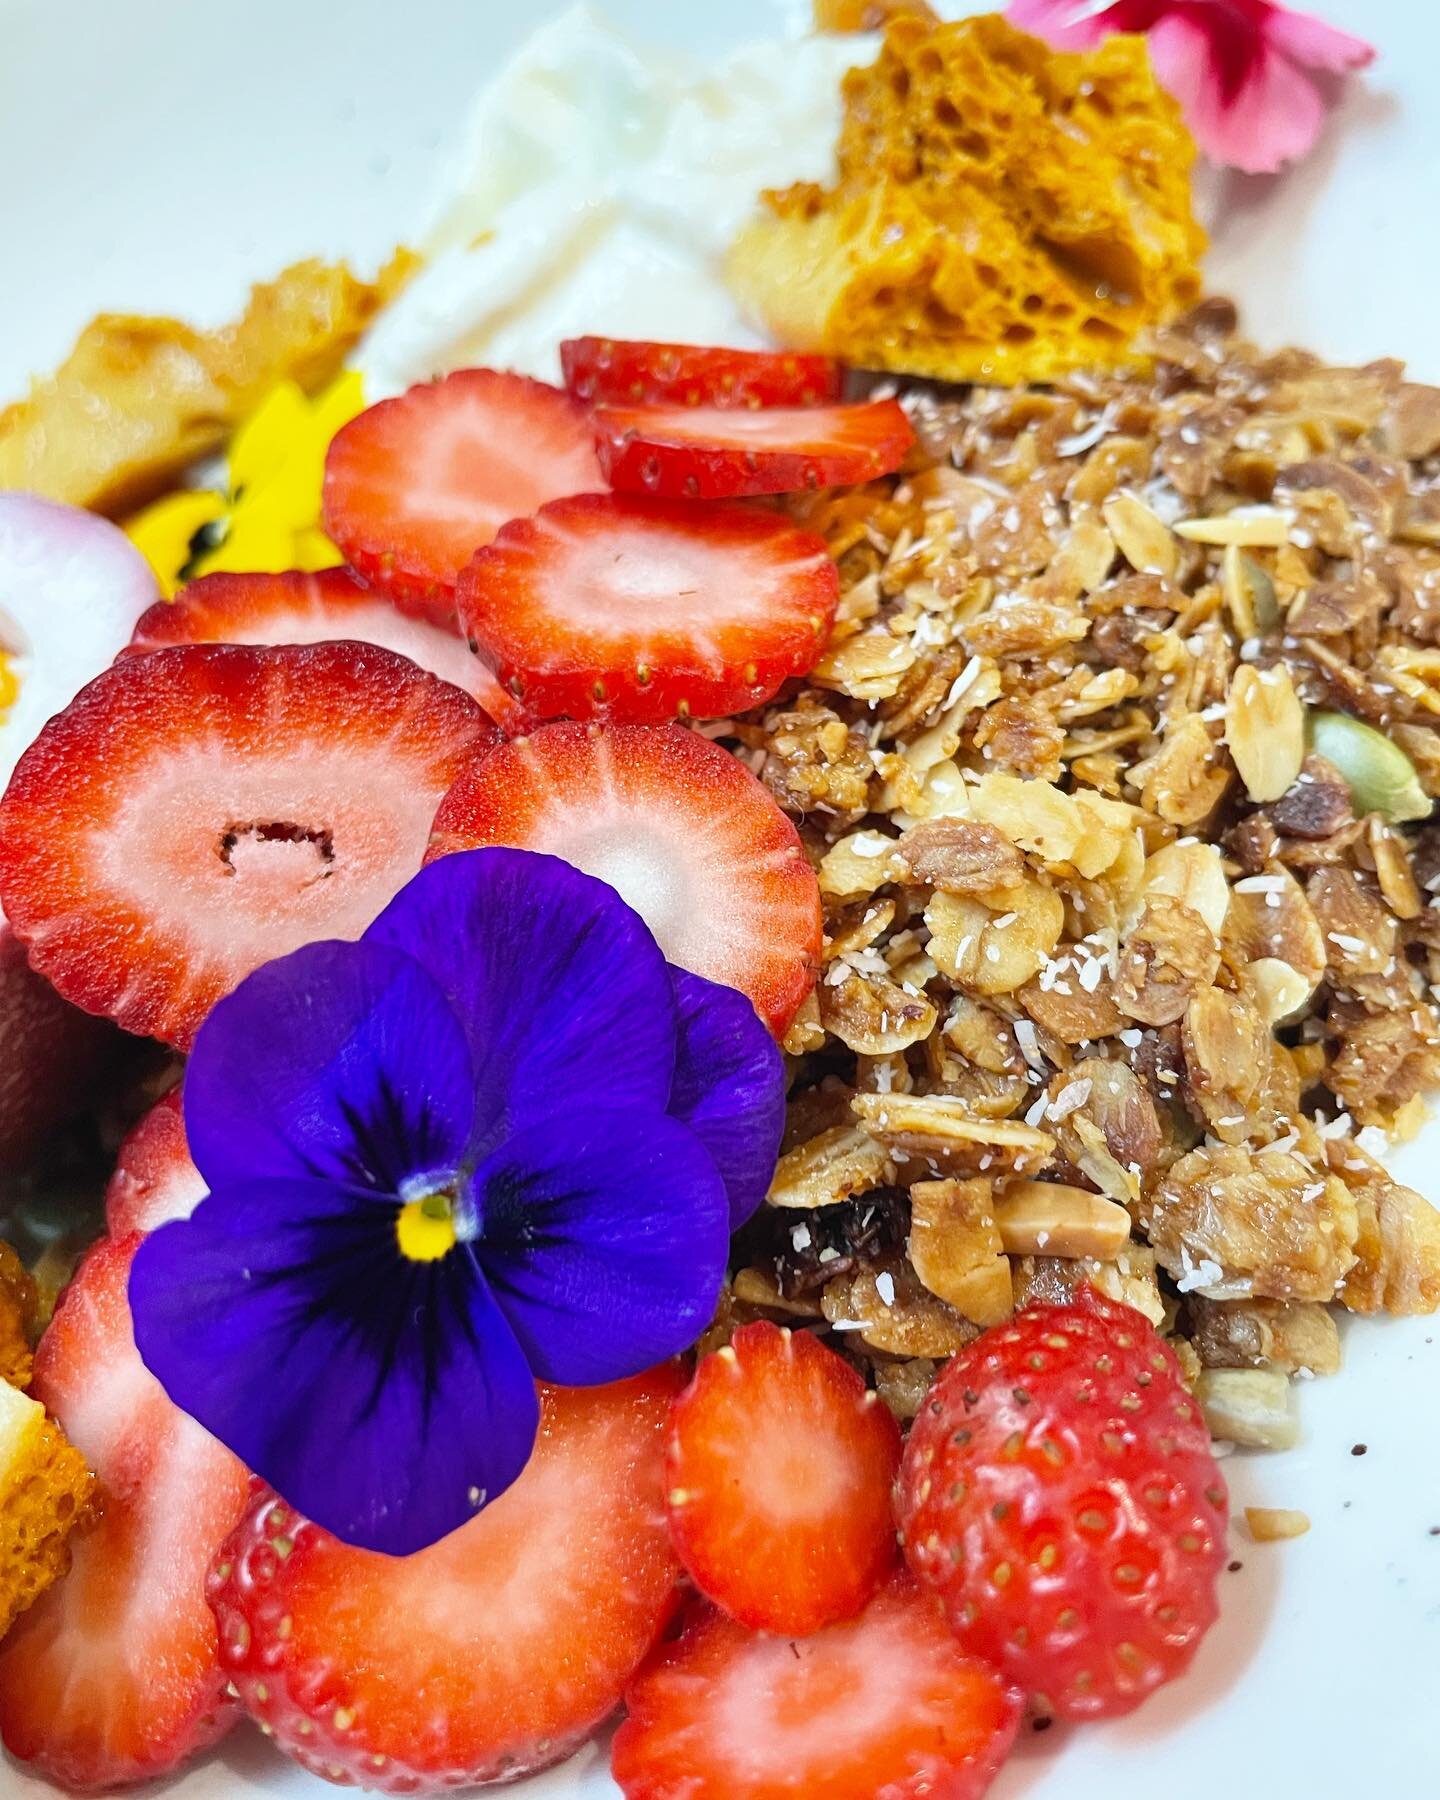 Our new house made granola hits a little different.